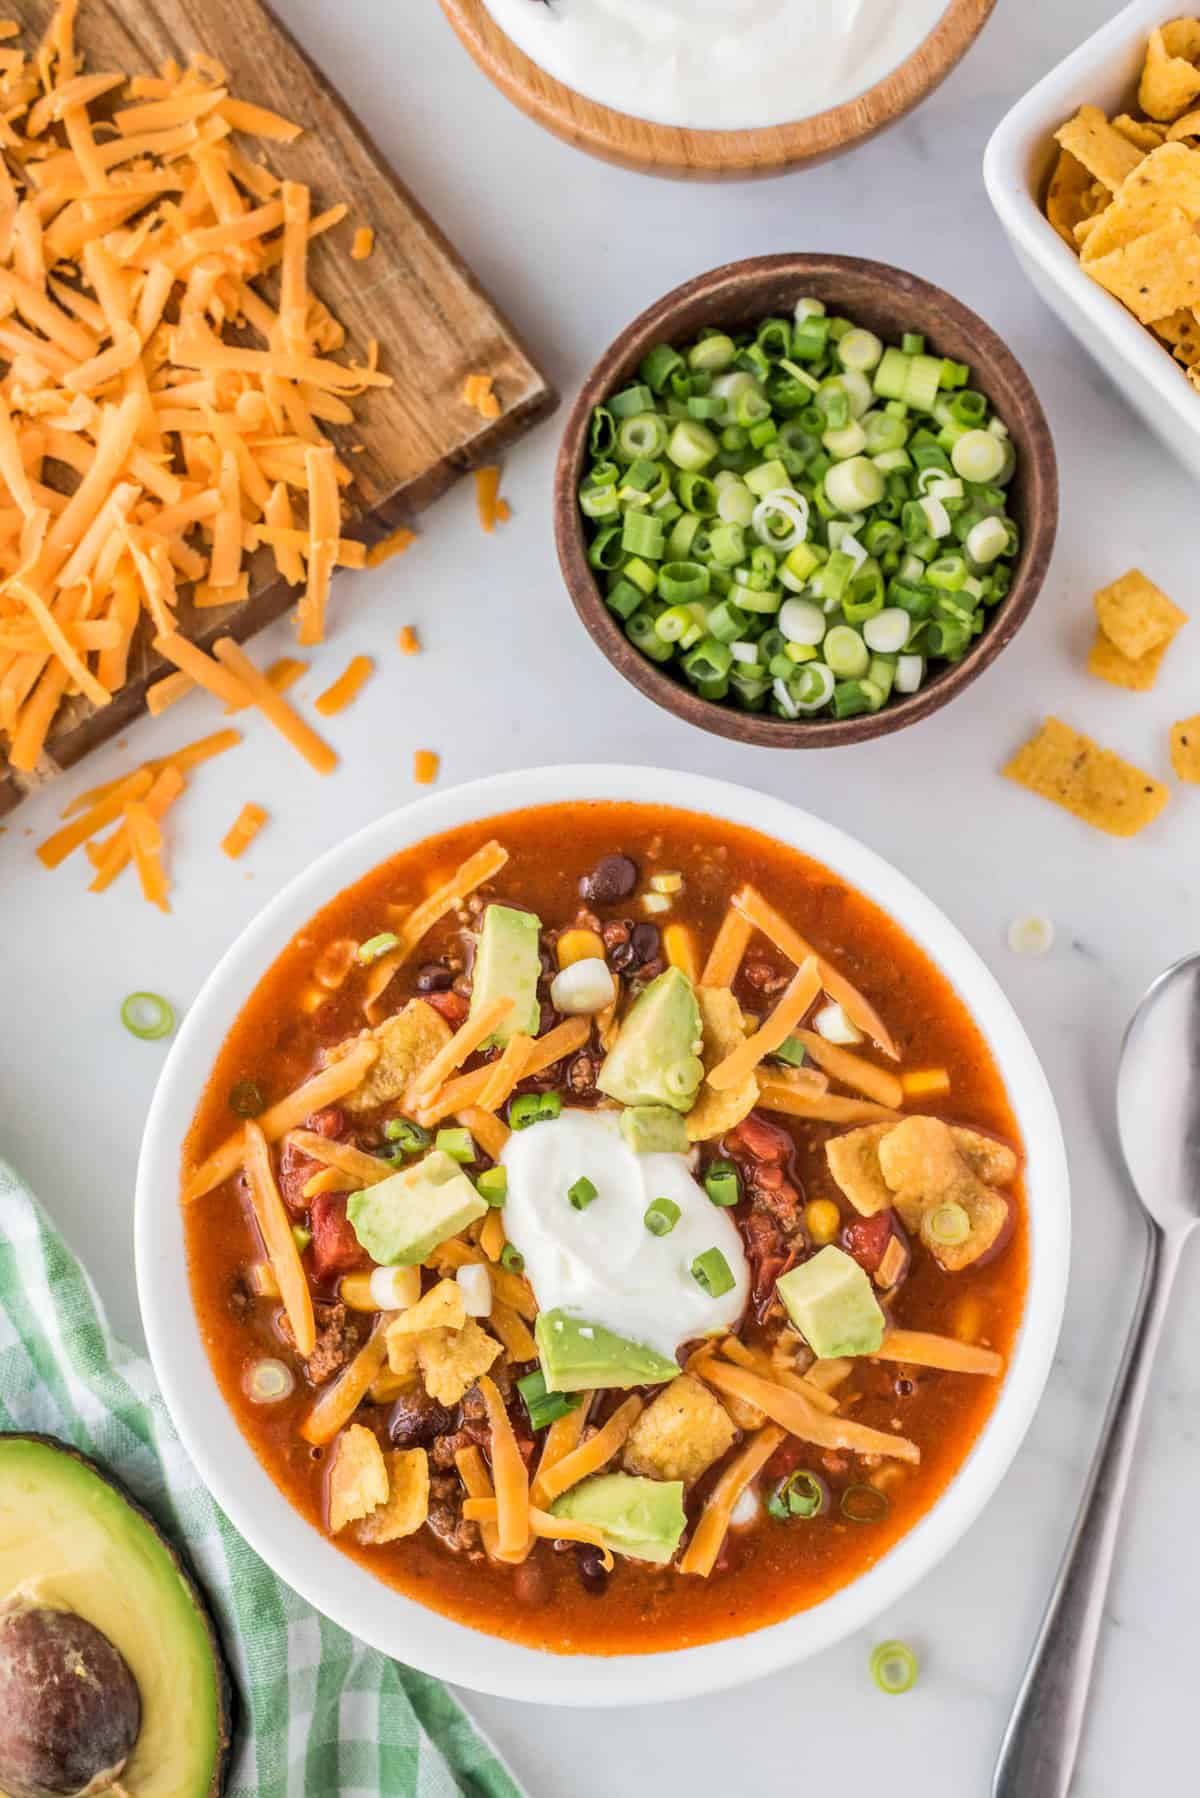 Beef Taco Soup From the Instant Pot Ready to Enjoy Topped with All the Fixings